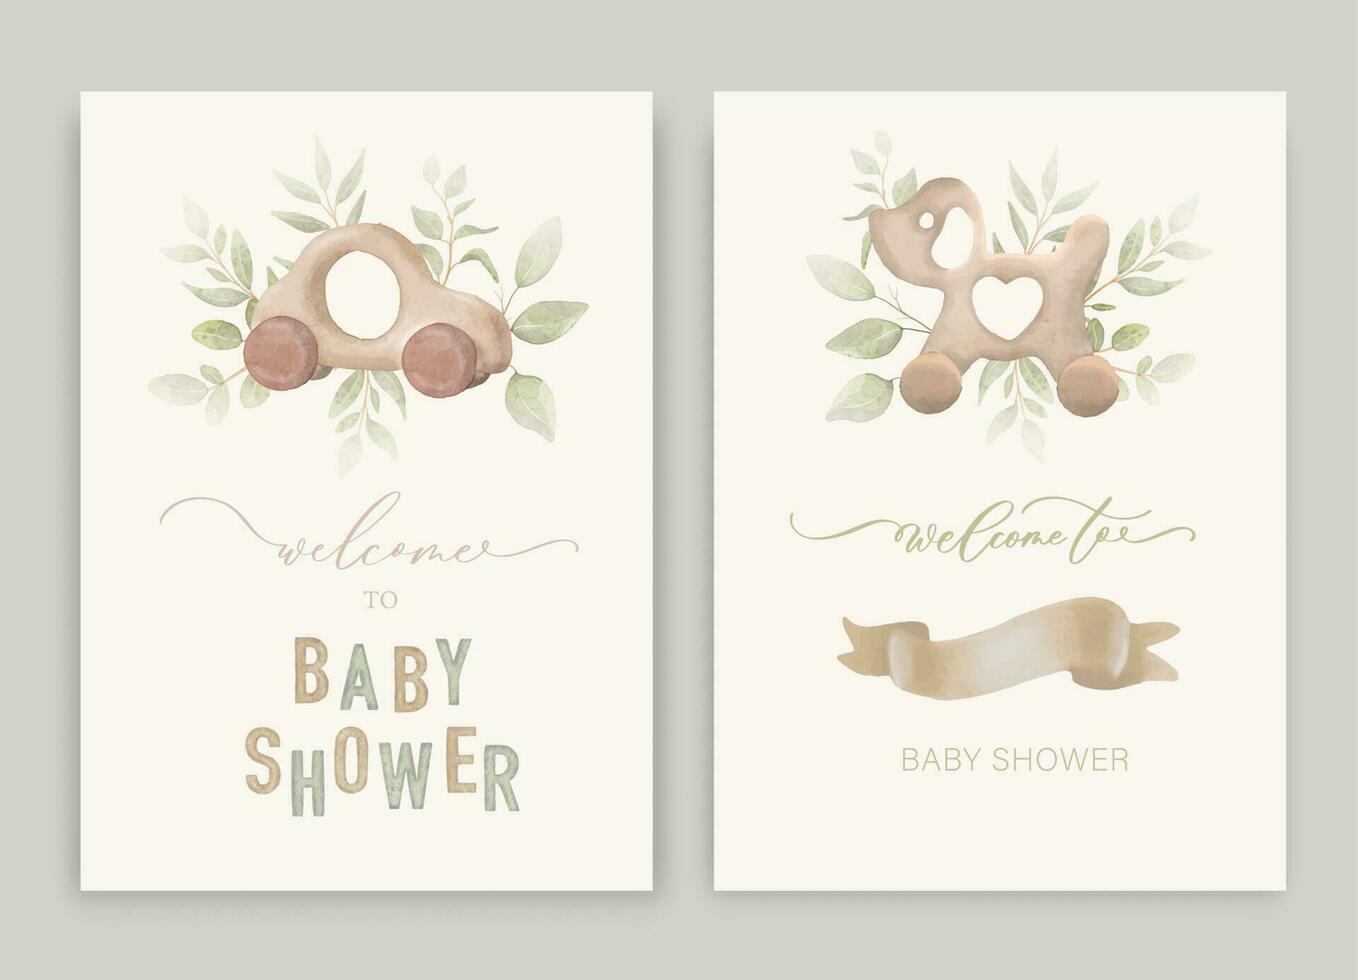 Cute baby shower watercolor invitation card for baby and kids new born celebration. With wooden car, green leaves and calligraphy inscription. vector